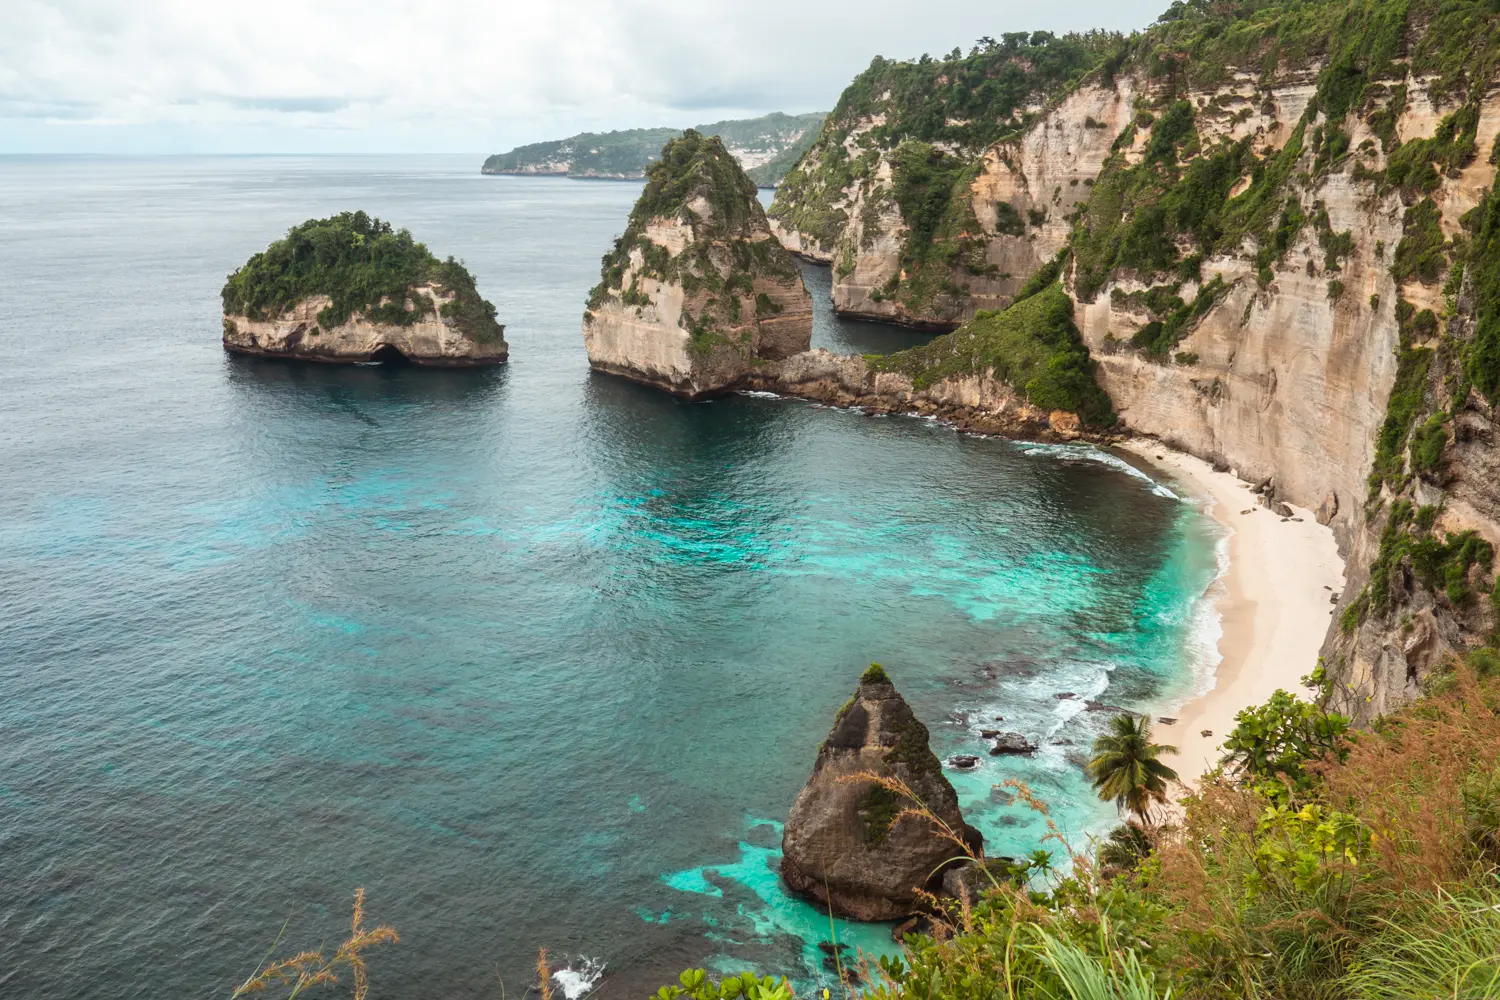 Looking down on the white Diamond Beach and turquoise water at the bottom of tall cliffs, is Nusa Penida worth visiting?